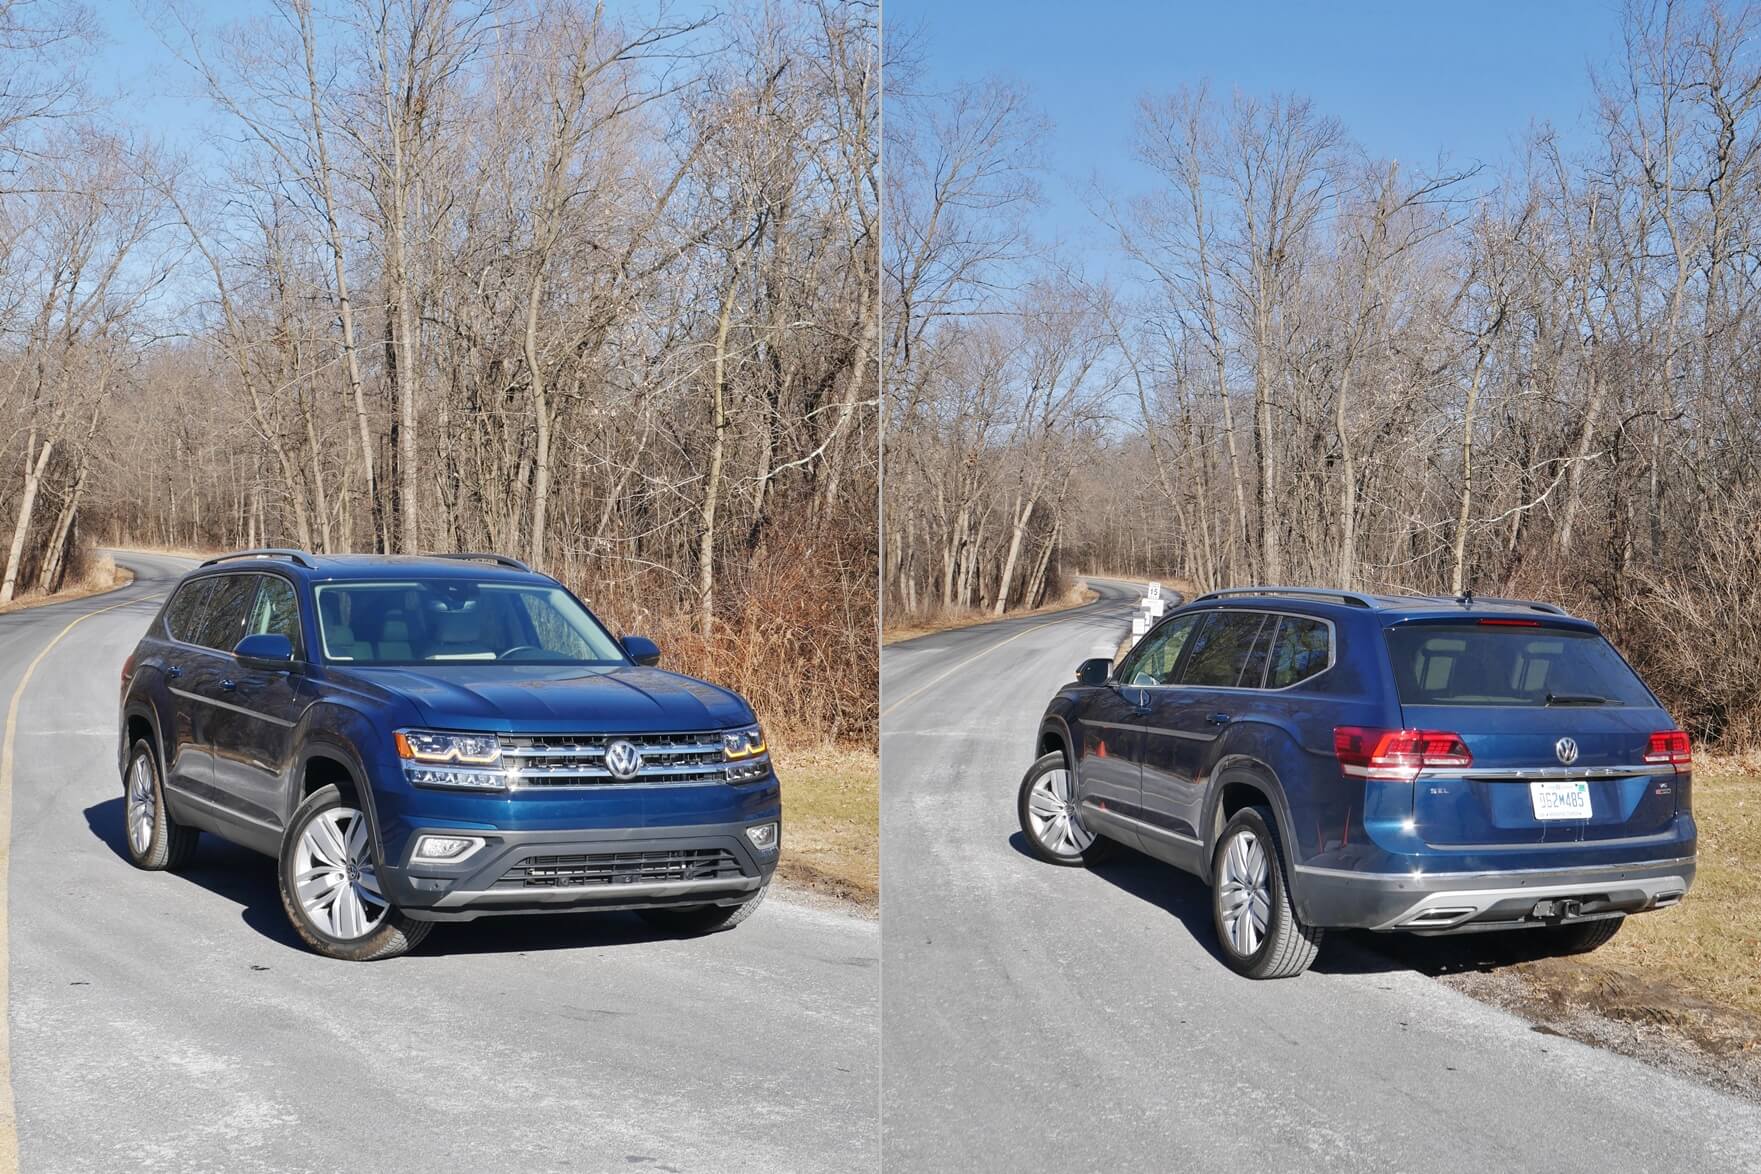 2018 Volkswagen Atlas SEL Premium 3.6 4Motion: new 3-Row family crossover SUV in town w/ light off-road capability